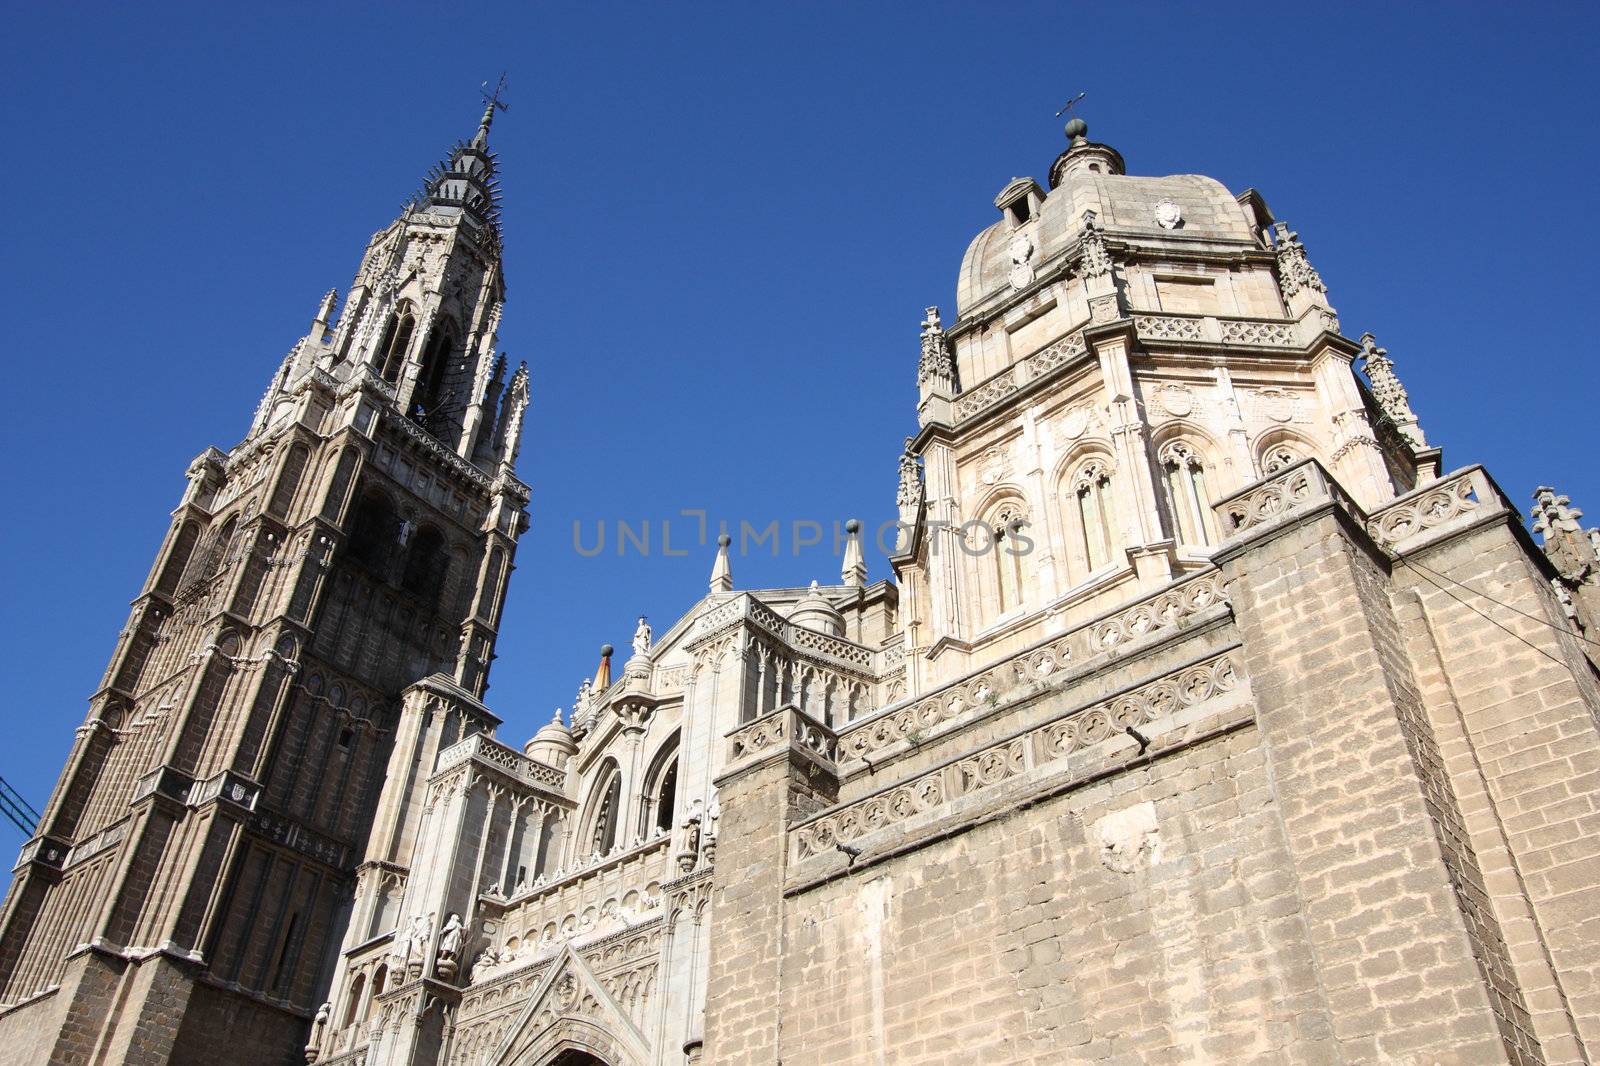 Toledo cathedral - beautiful old church facade. Spain, Europe.